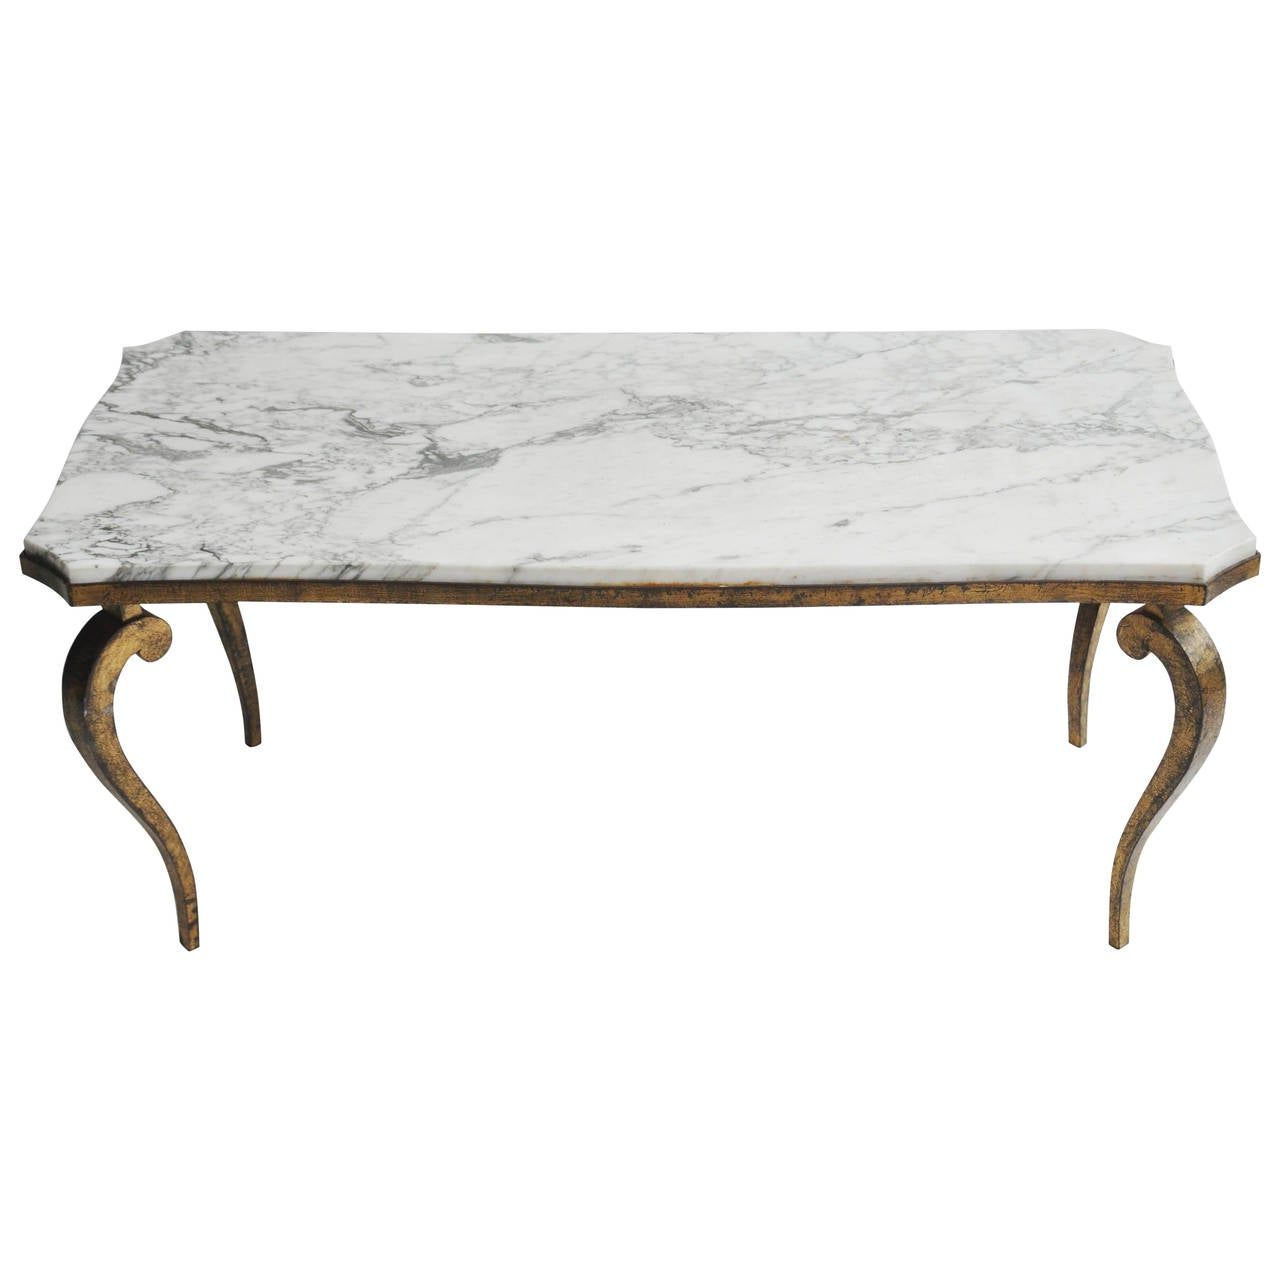 2018 Marble And Gold Leaf Cabriole Leg Coffee Tableramsay Intended For Antiqued Gold Leaf Coffee Tables (View 8 of 20)